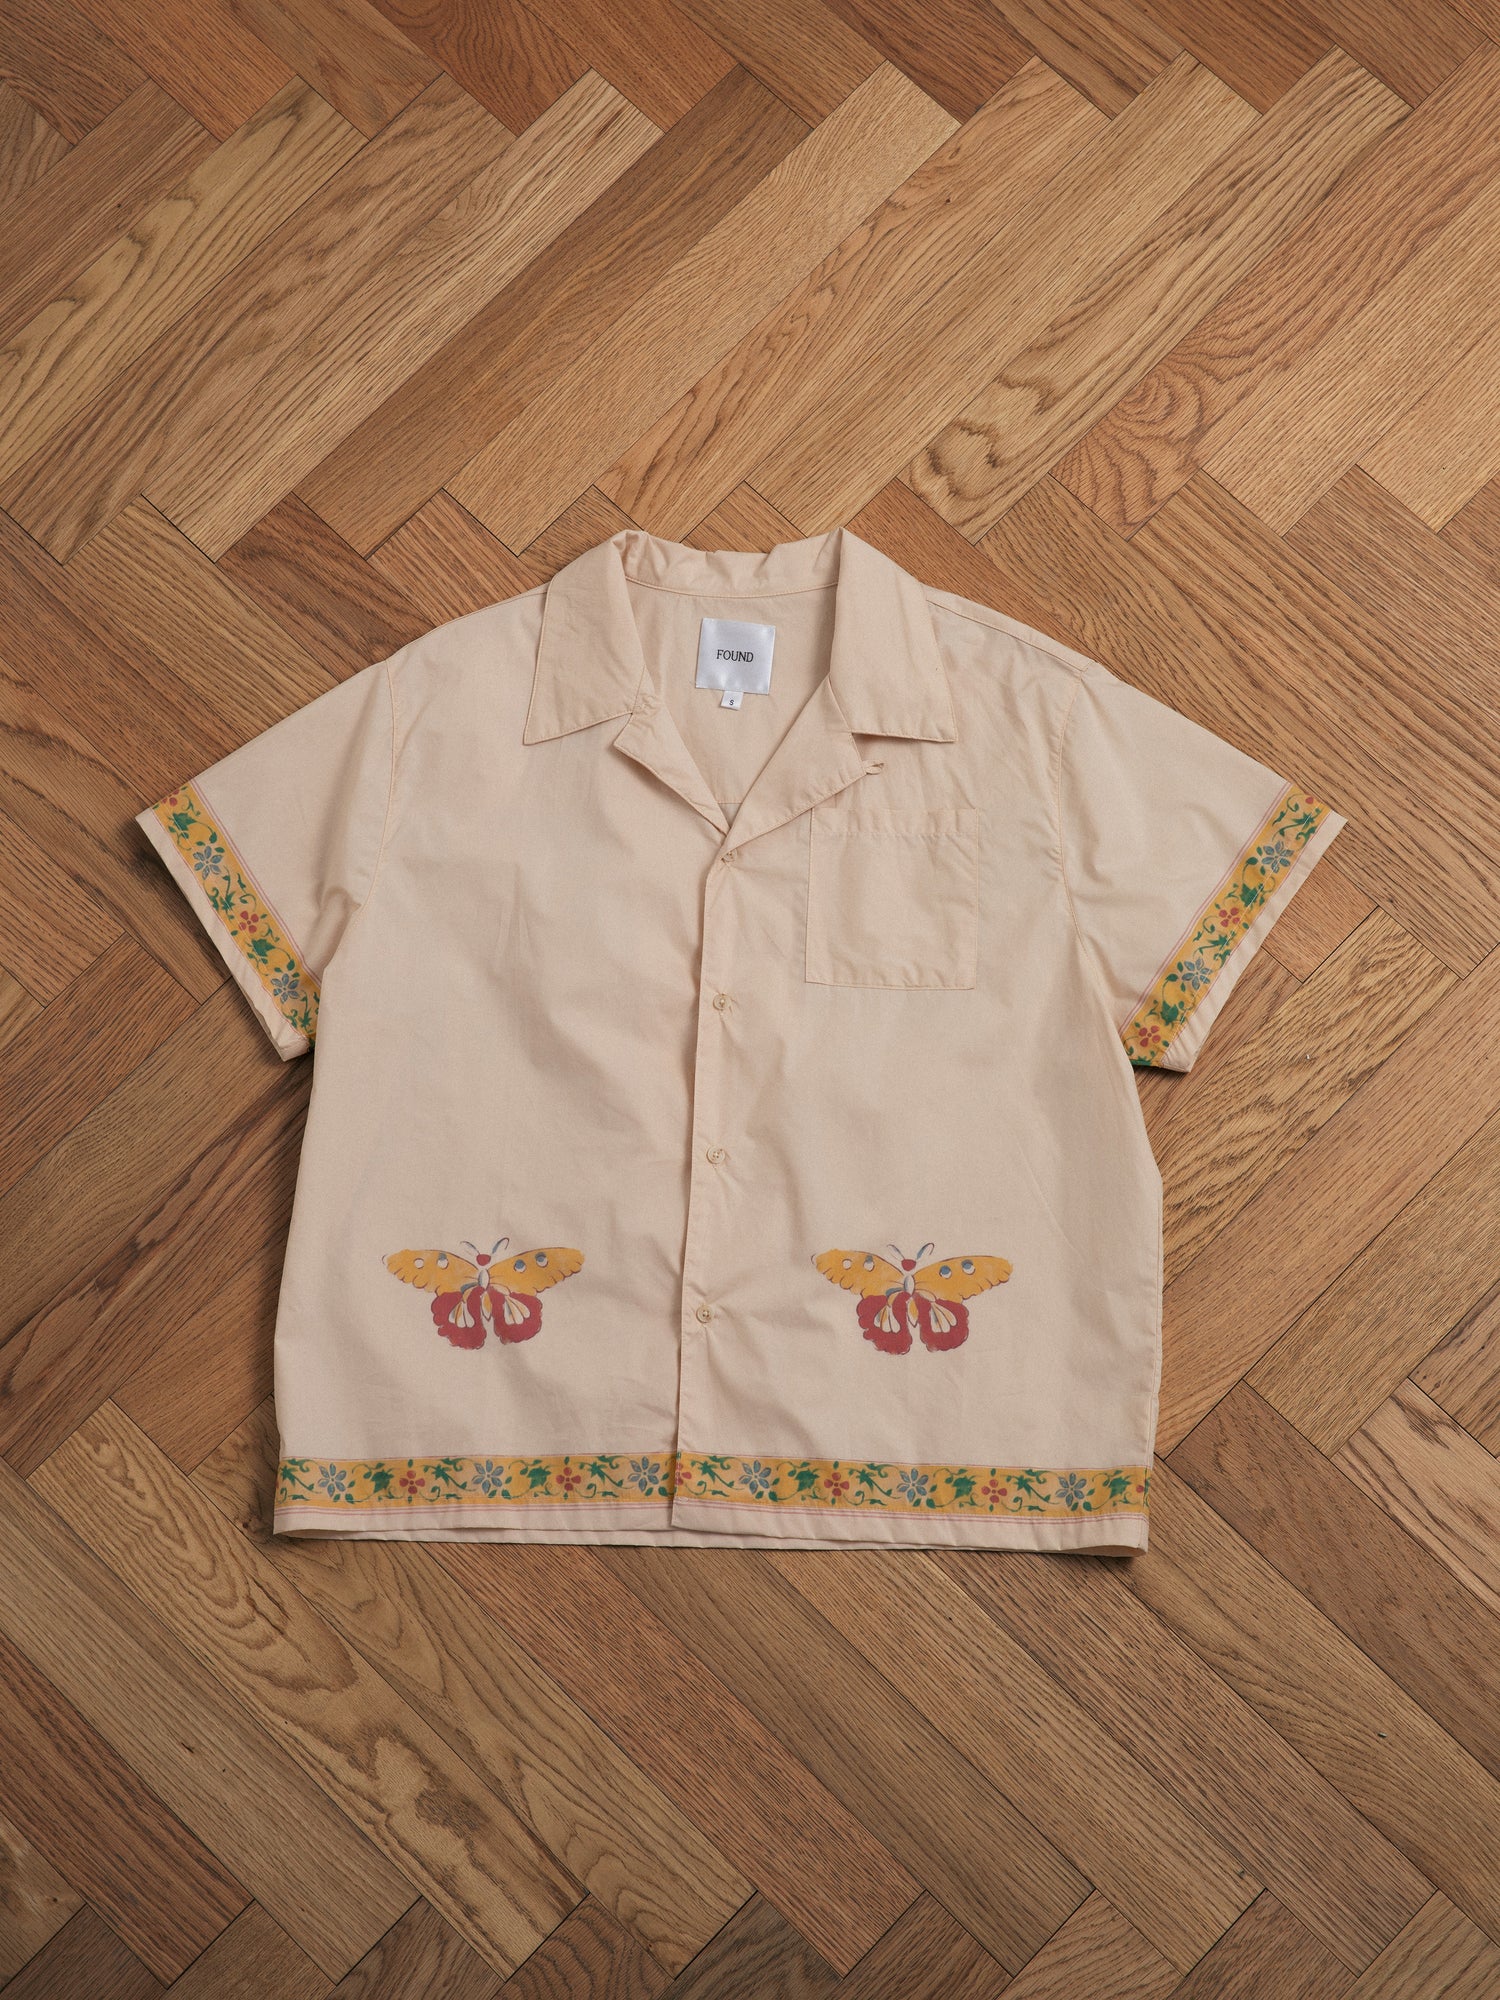 A beige shirt with embroidered butterflies and Phulkari motifs on it.